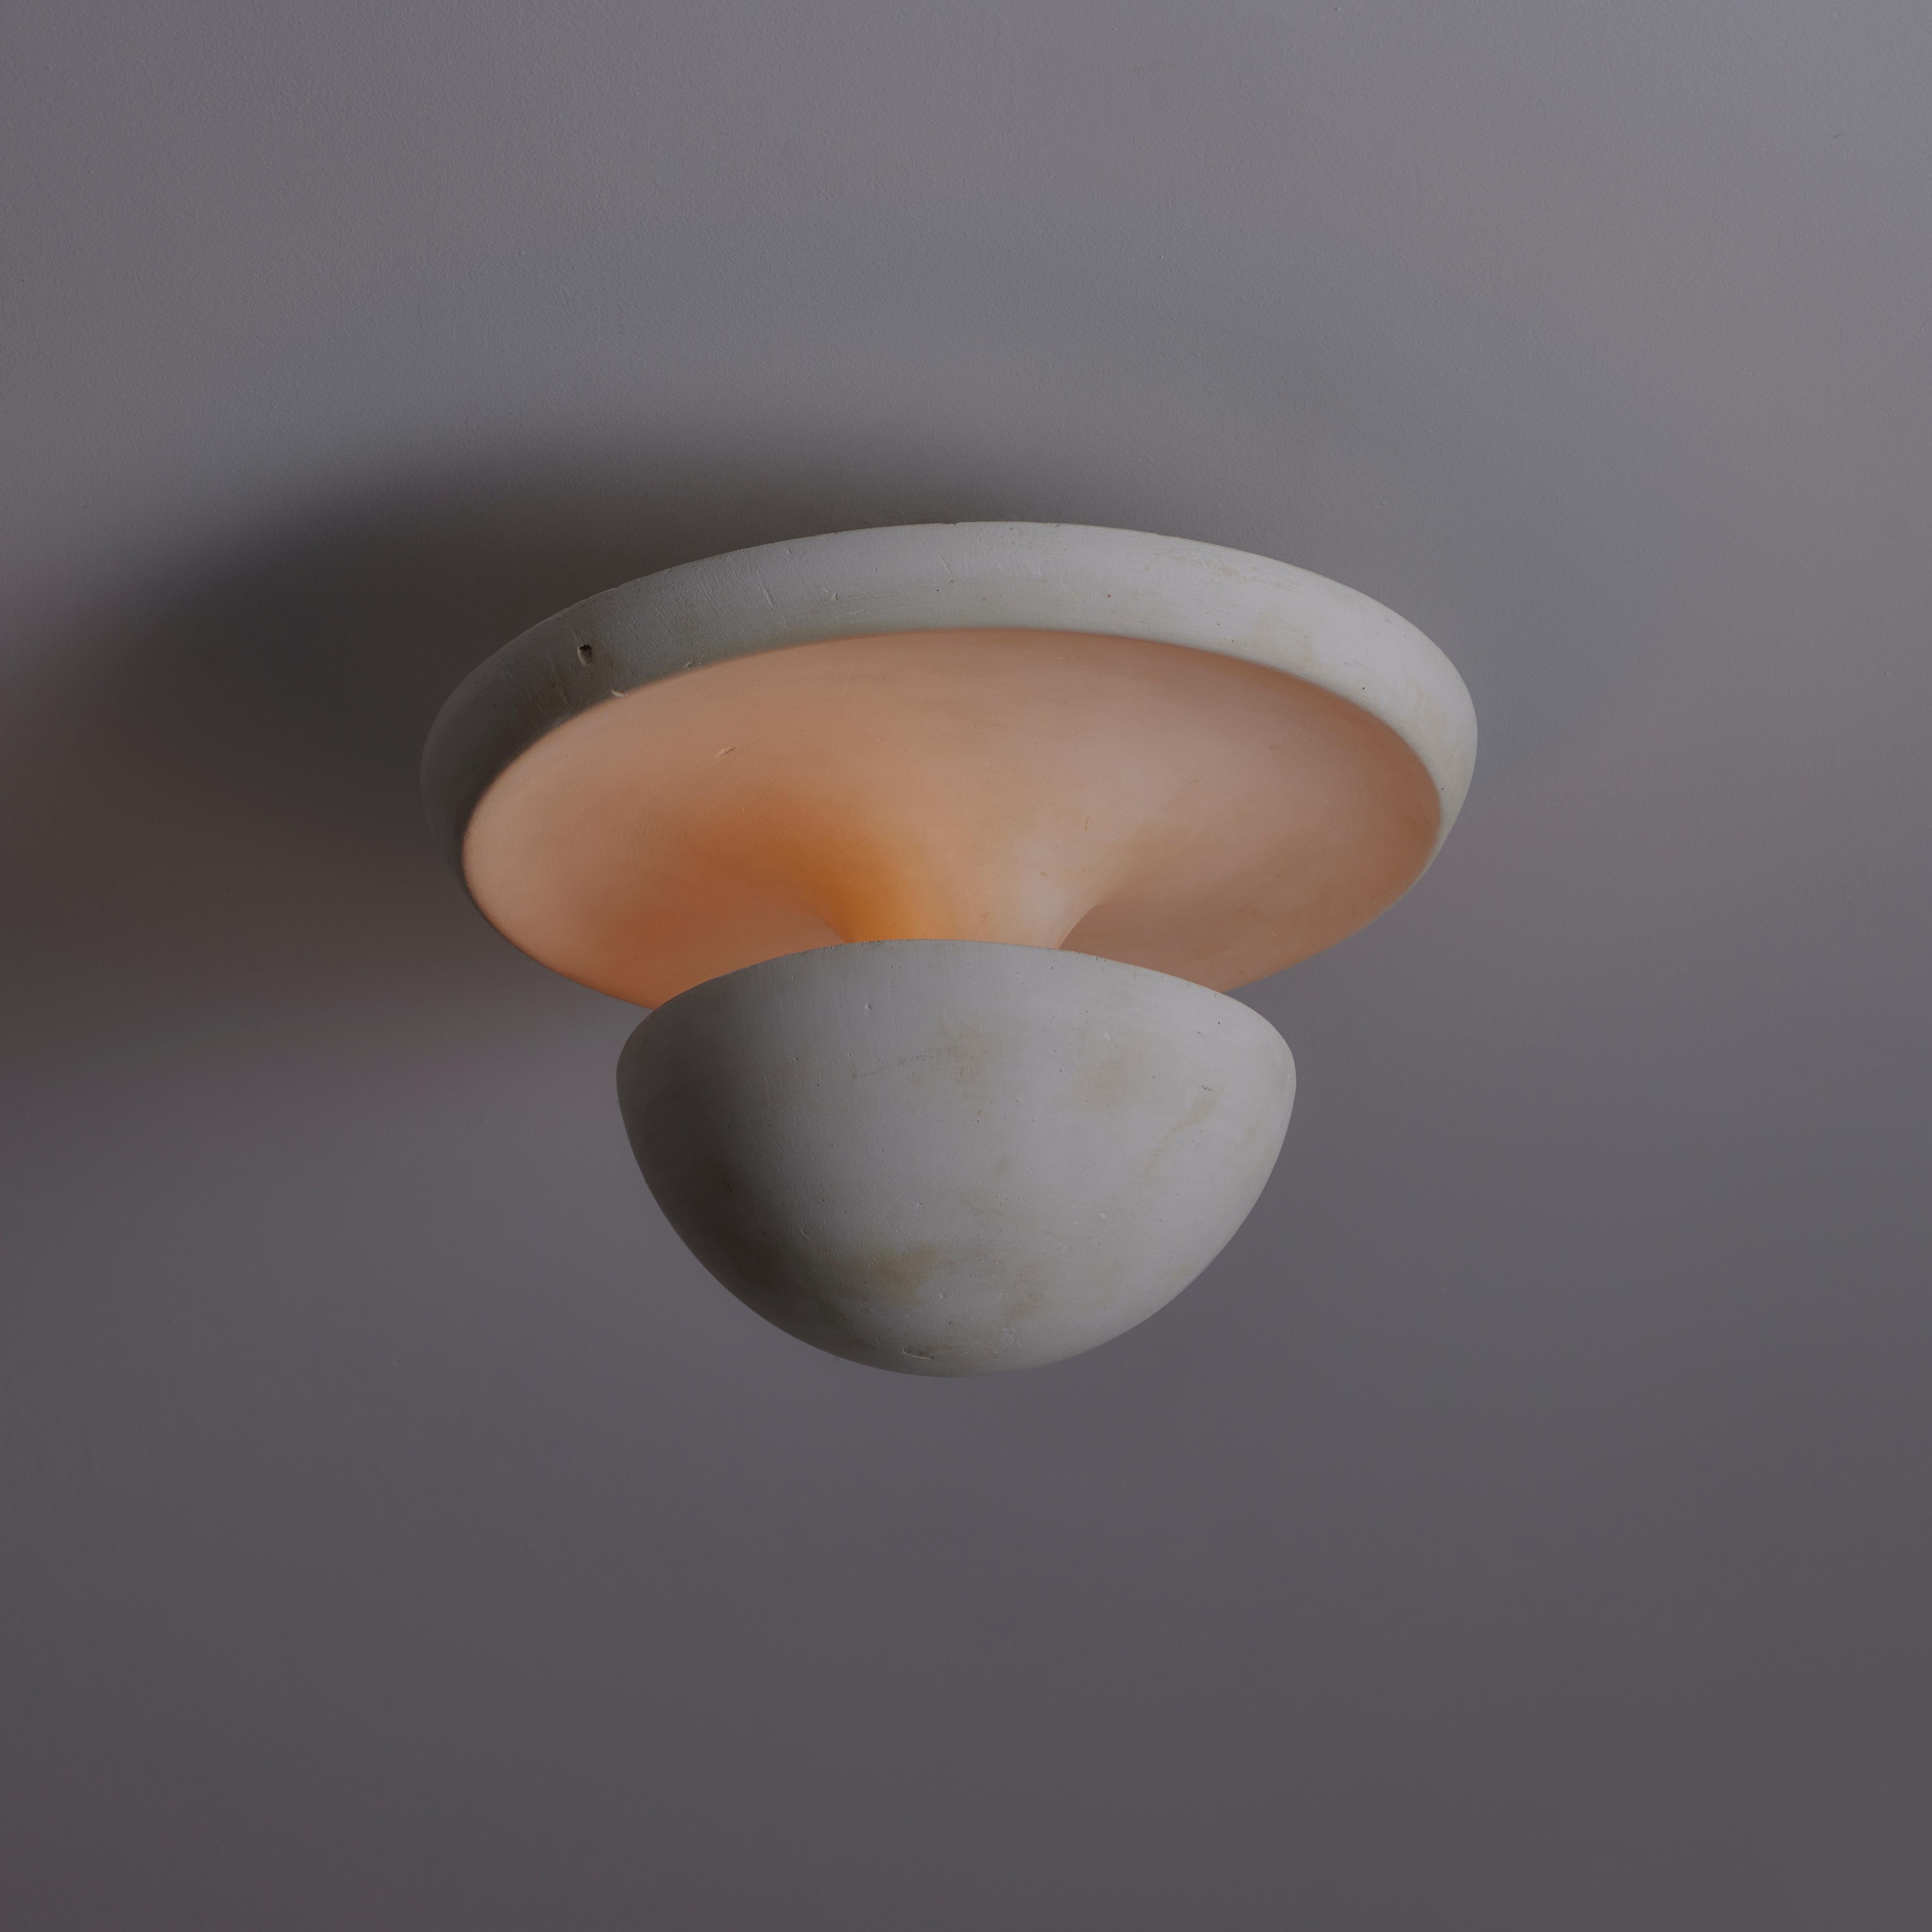 Plastered French Flush Mount. Designed and manufactured in France, circa the 1940s. An all plaster flush mount with a fluted relief and bottom bowl allowing for an eclipsed illumination reflecting towards the center and out onto the fluted upper